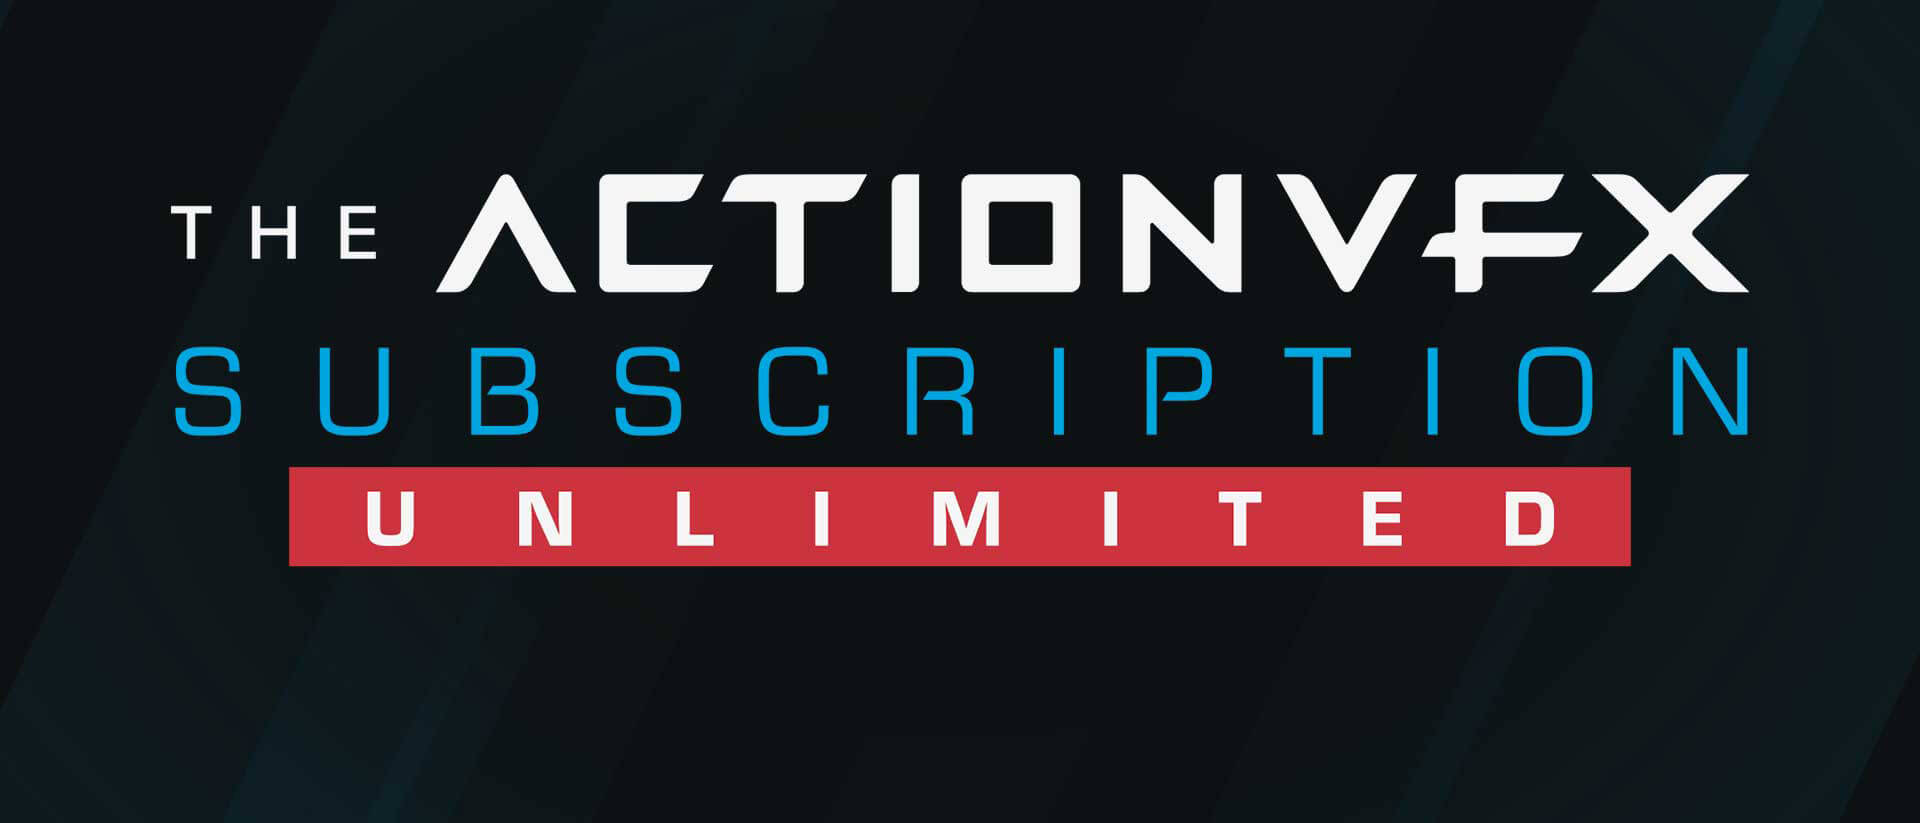 Give Your Team ActionVFX Unlimited This Black Friday